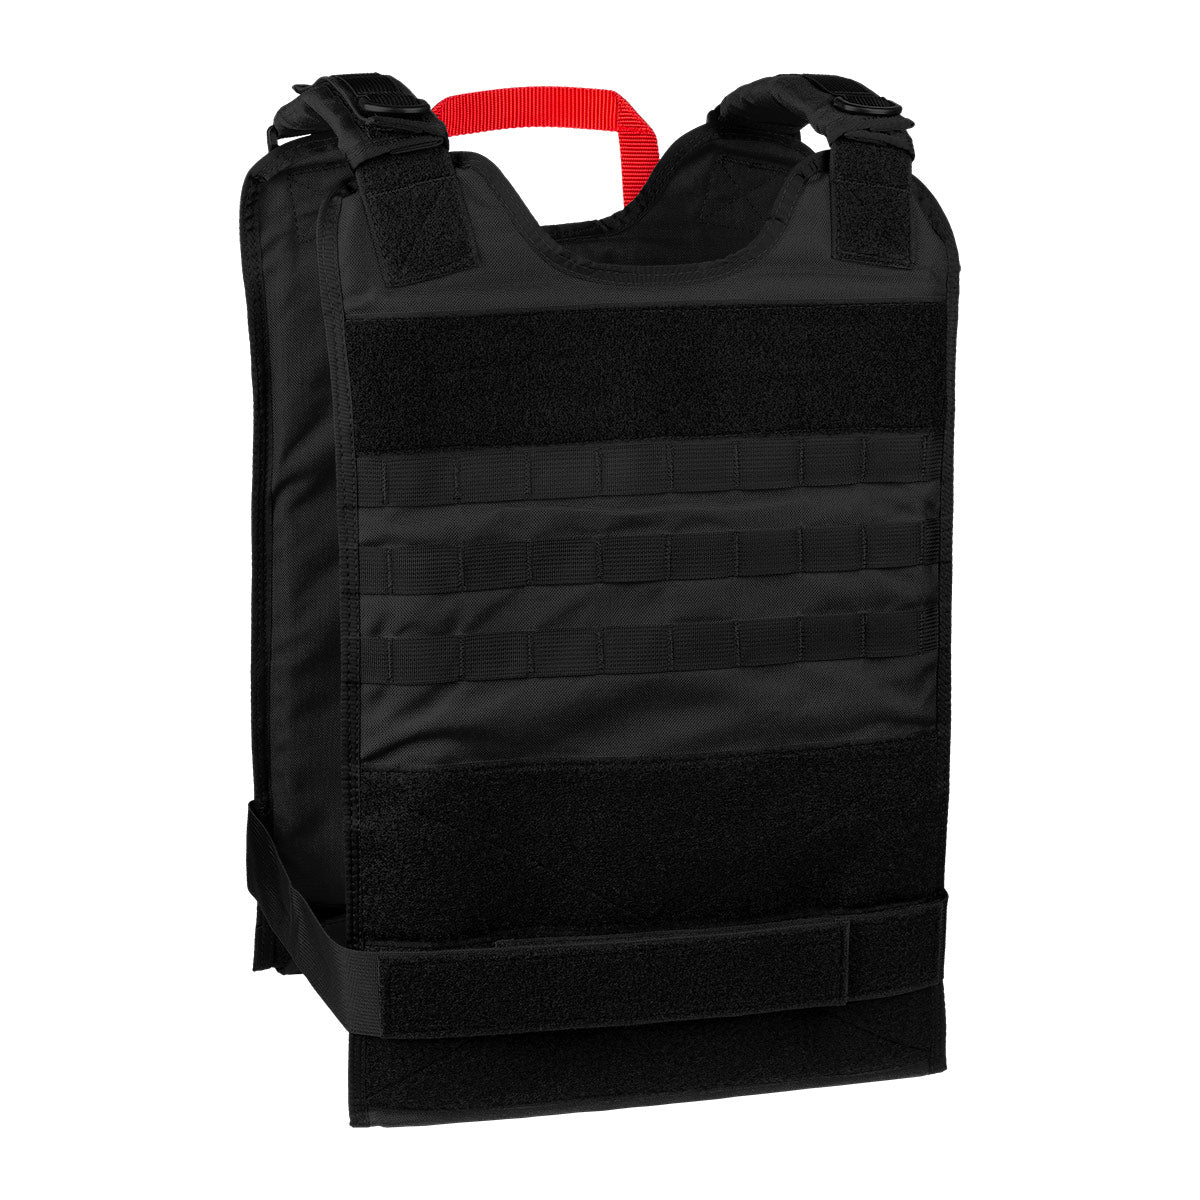 TacMed™ Responder Armor System - Plate Carrier Only (No Armor)